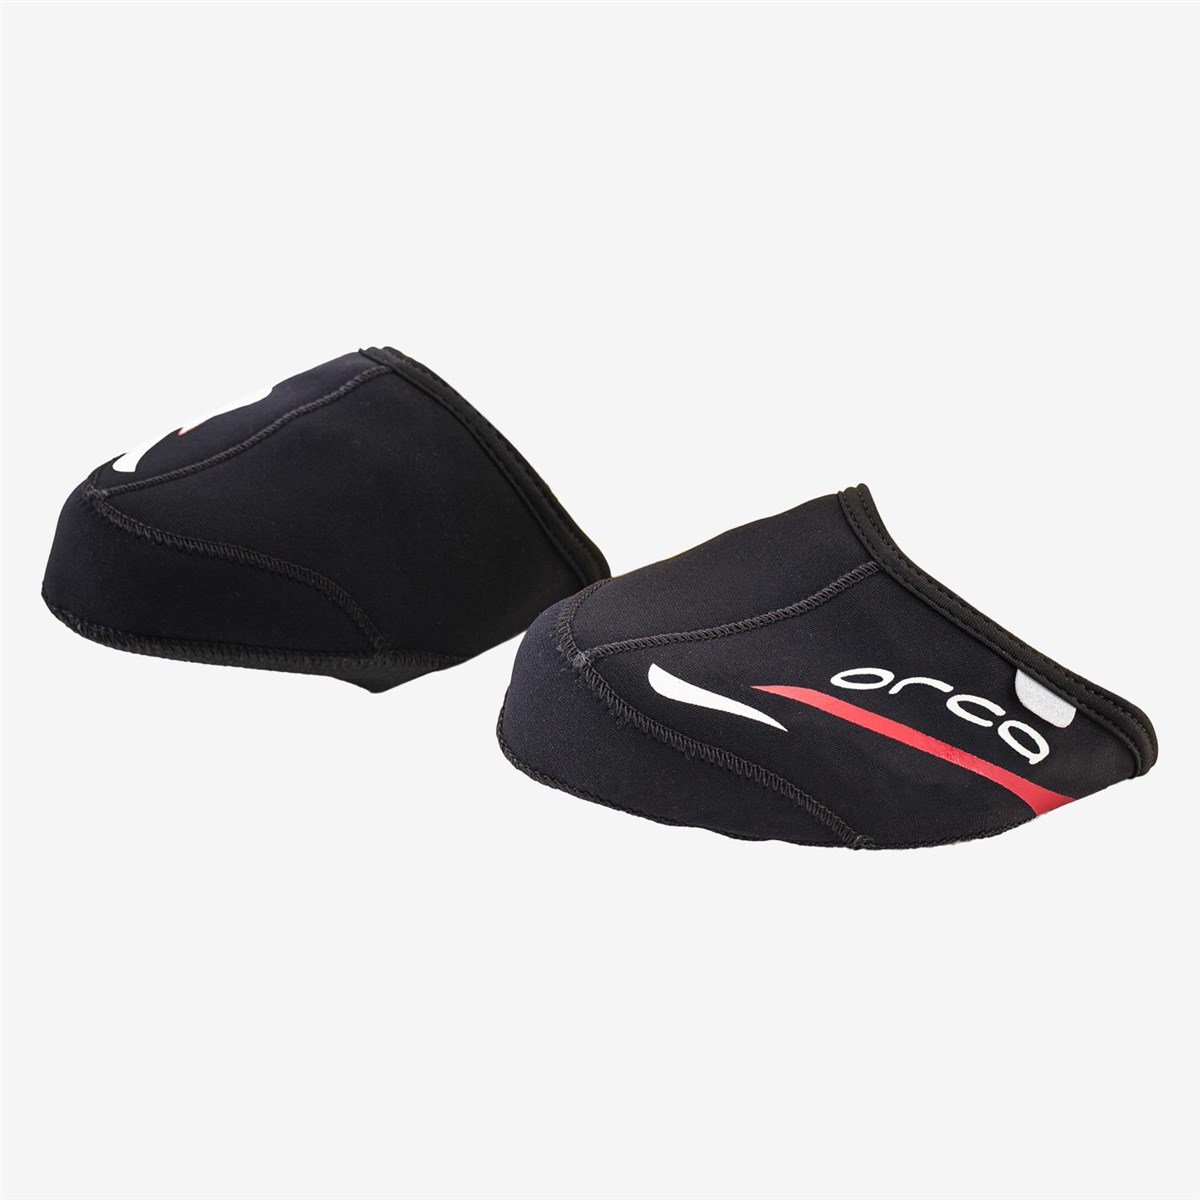 Orca Neoprene Toe Cover product image